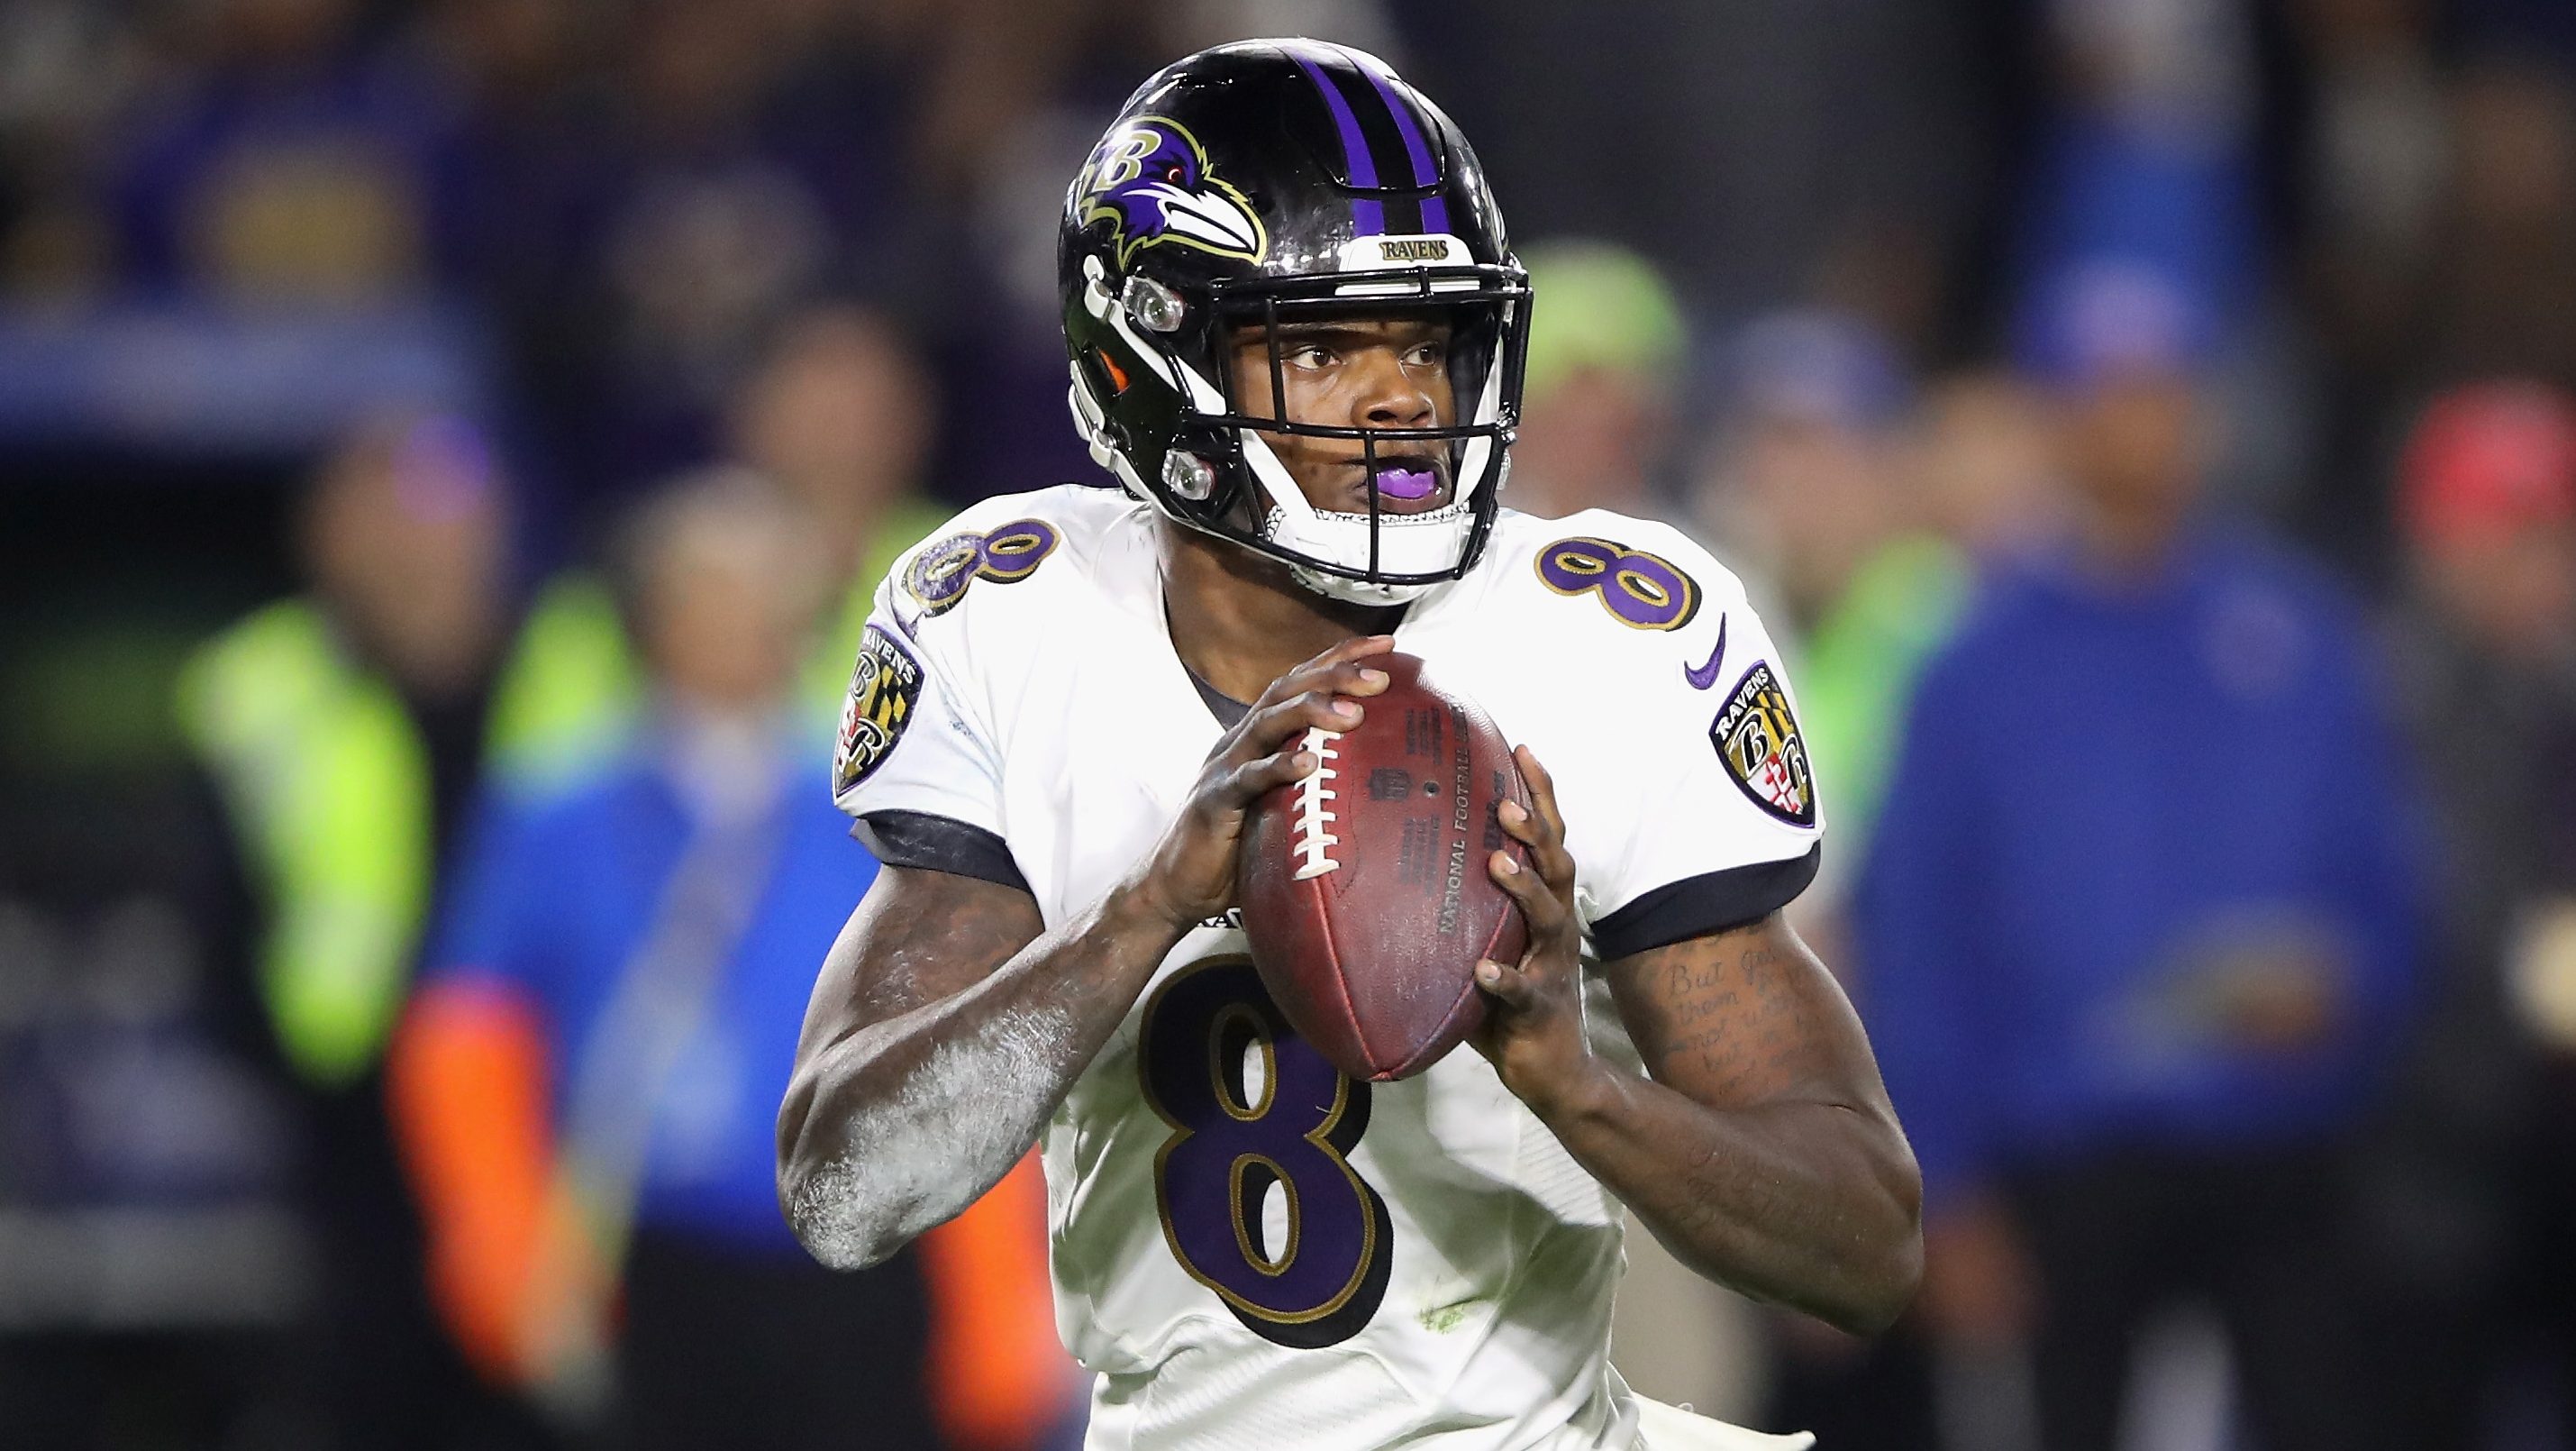 Ravens Playoff Picture: Can They Make It With Win & Loss? | Heavy.com